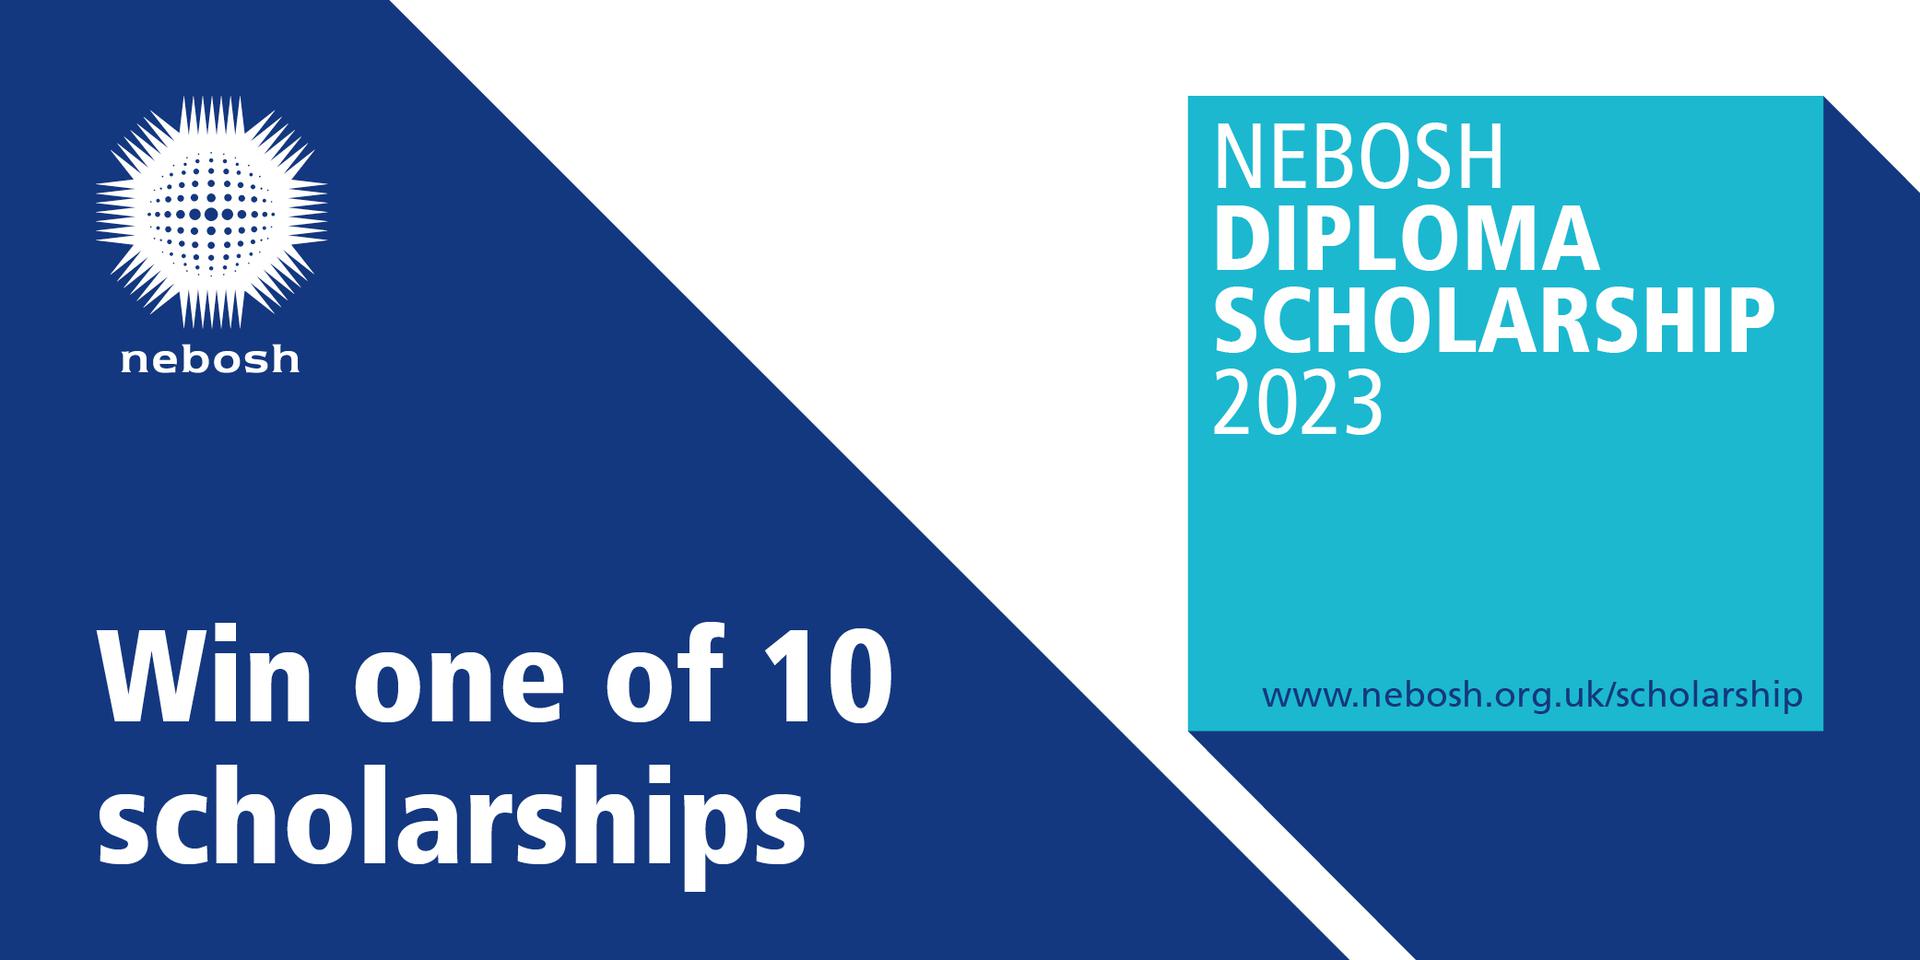 NEBOSH launches Diploma Scholarship for Health and Safety Professionals